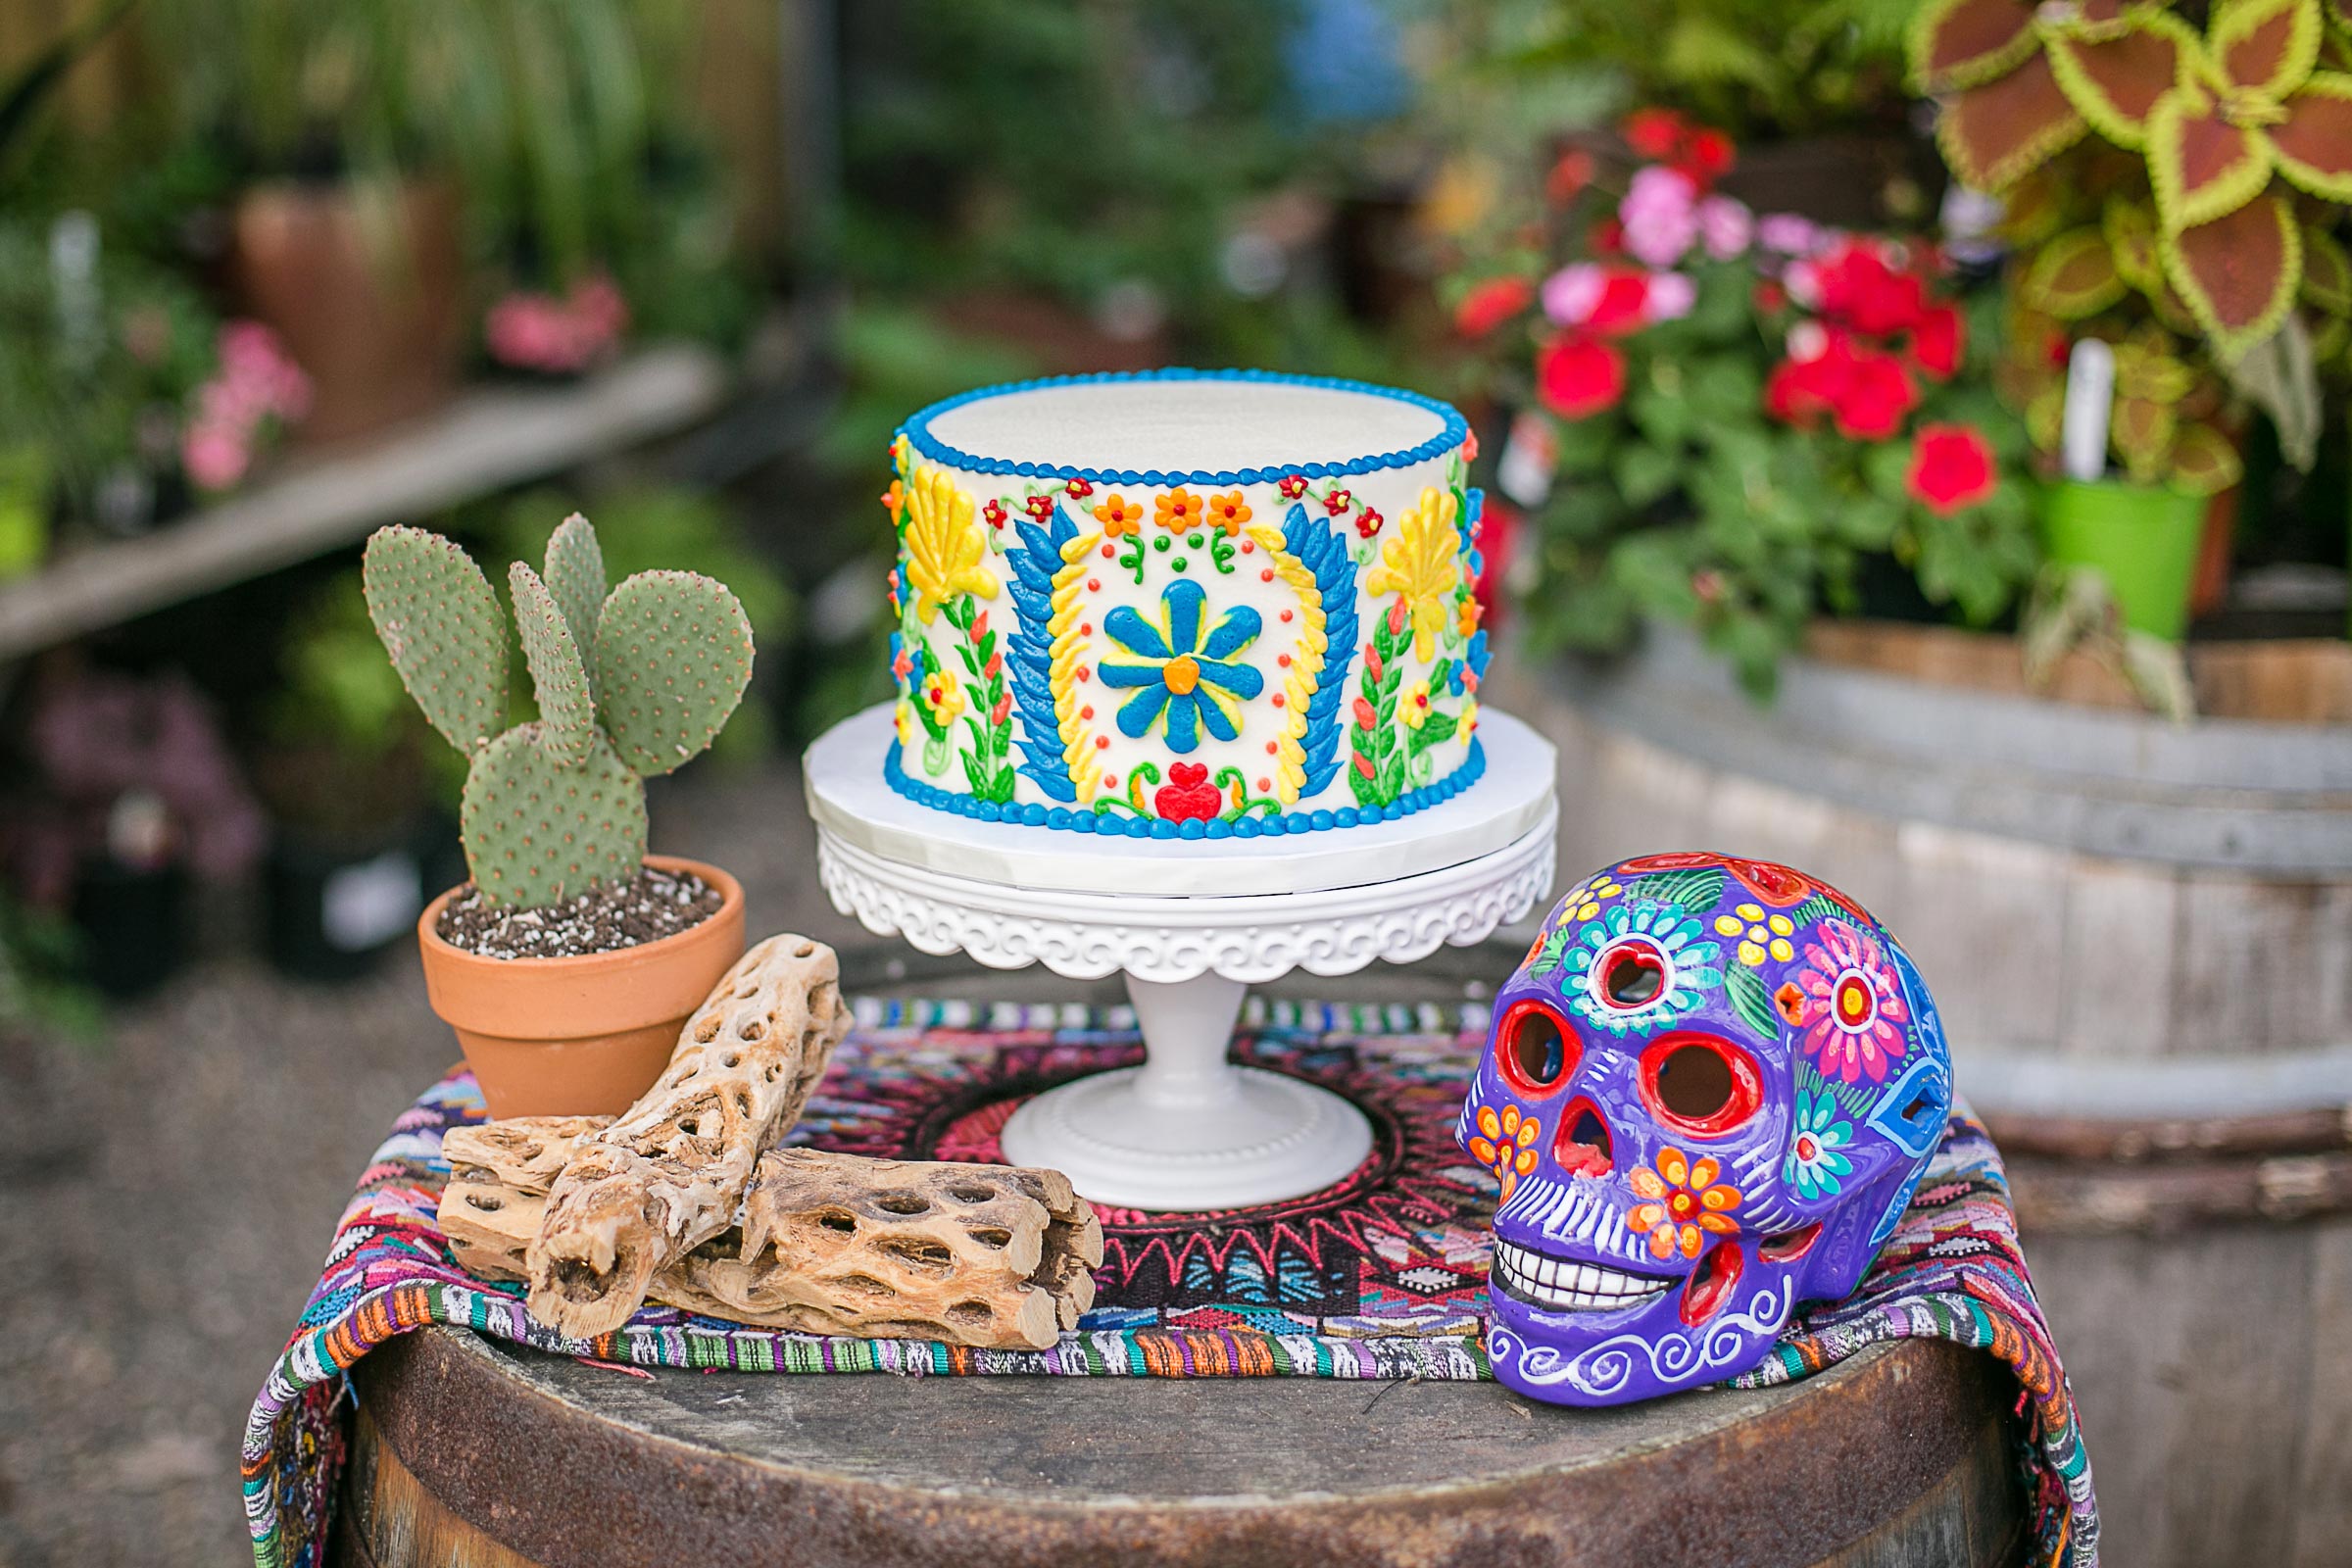 Adorable 5 de Mayo or Dia de Los Muertos themed mini cake inspiration for a fun bridal shower. How adorable is this colorful floral skull and this little cactus? // Get inspired with these Elegant Mexican Fiesta / Cinco de Mayo Themed Bridal Shower Ideas. // mysweetengagement.com